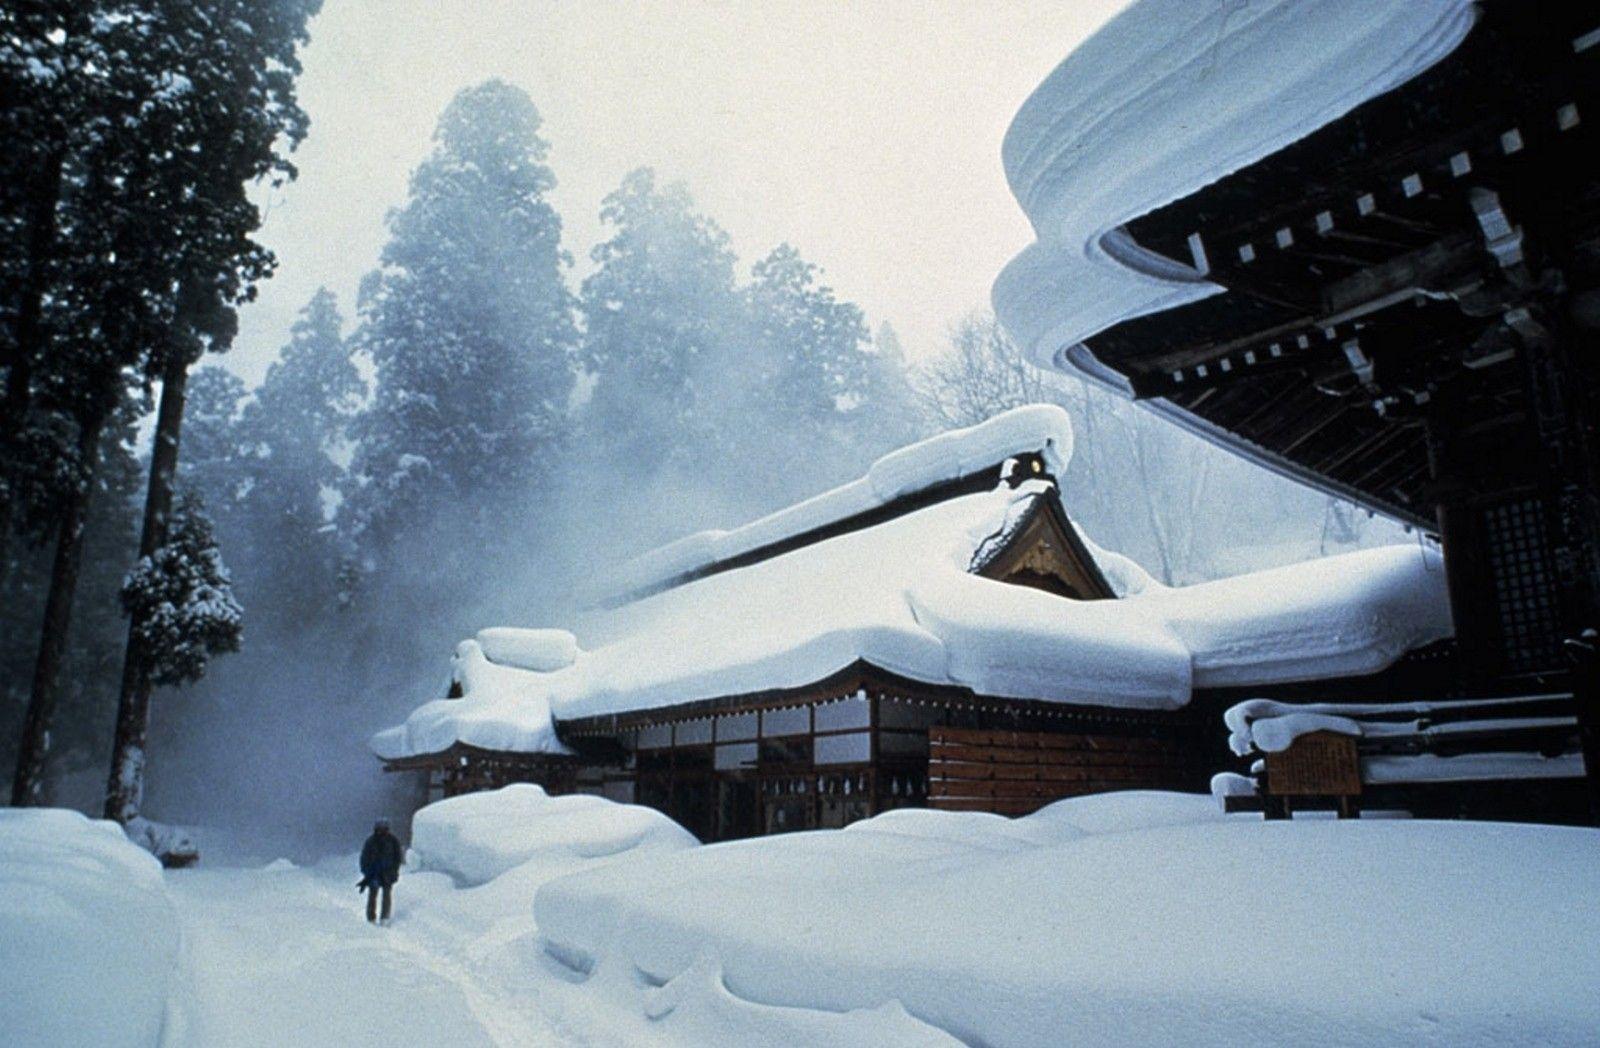 Japan Snow Night Wallpapers - Top Free Japan Snow Night Backgrounds ...